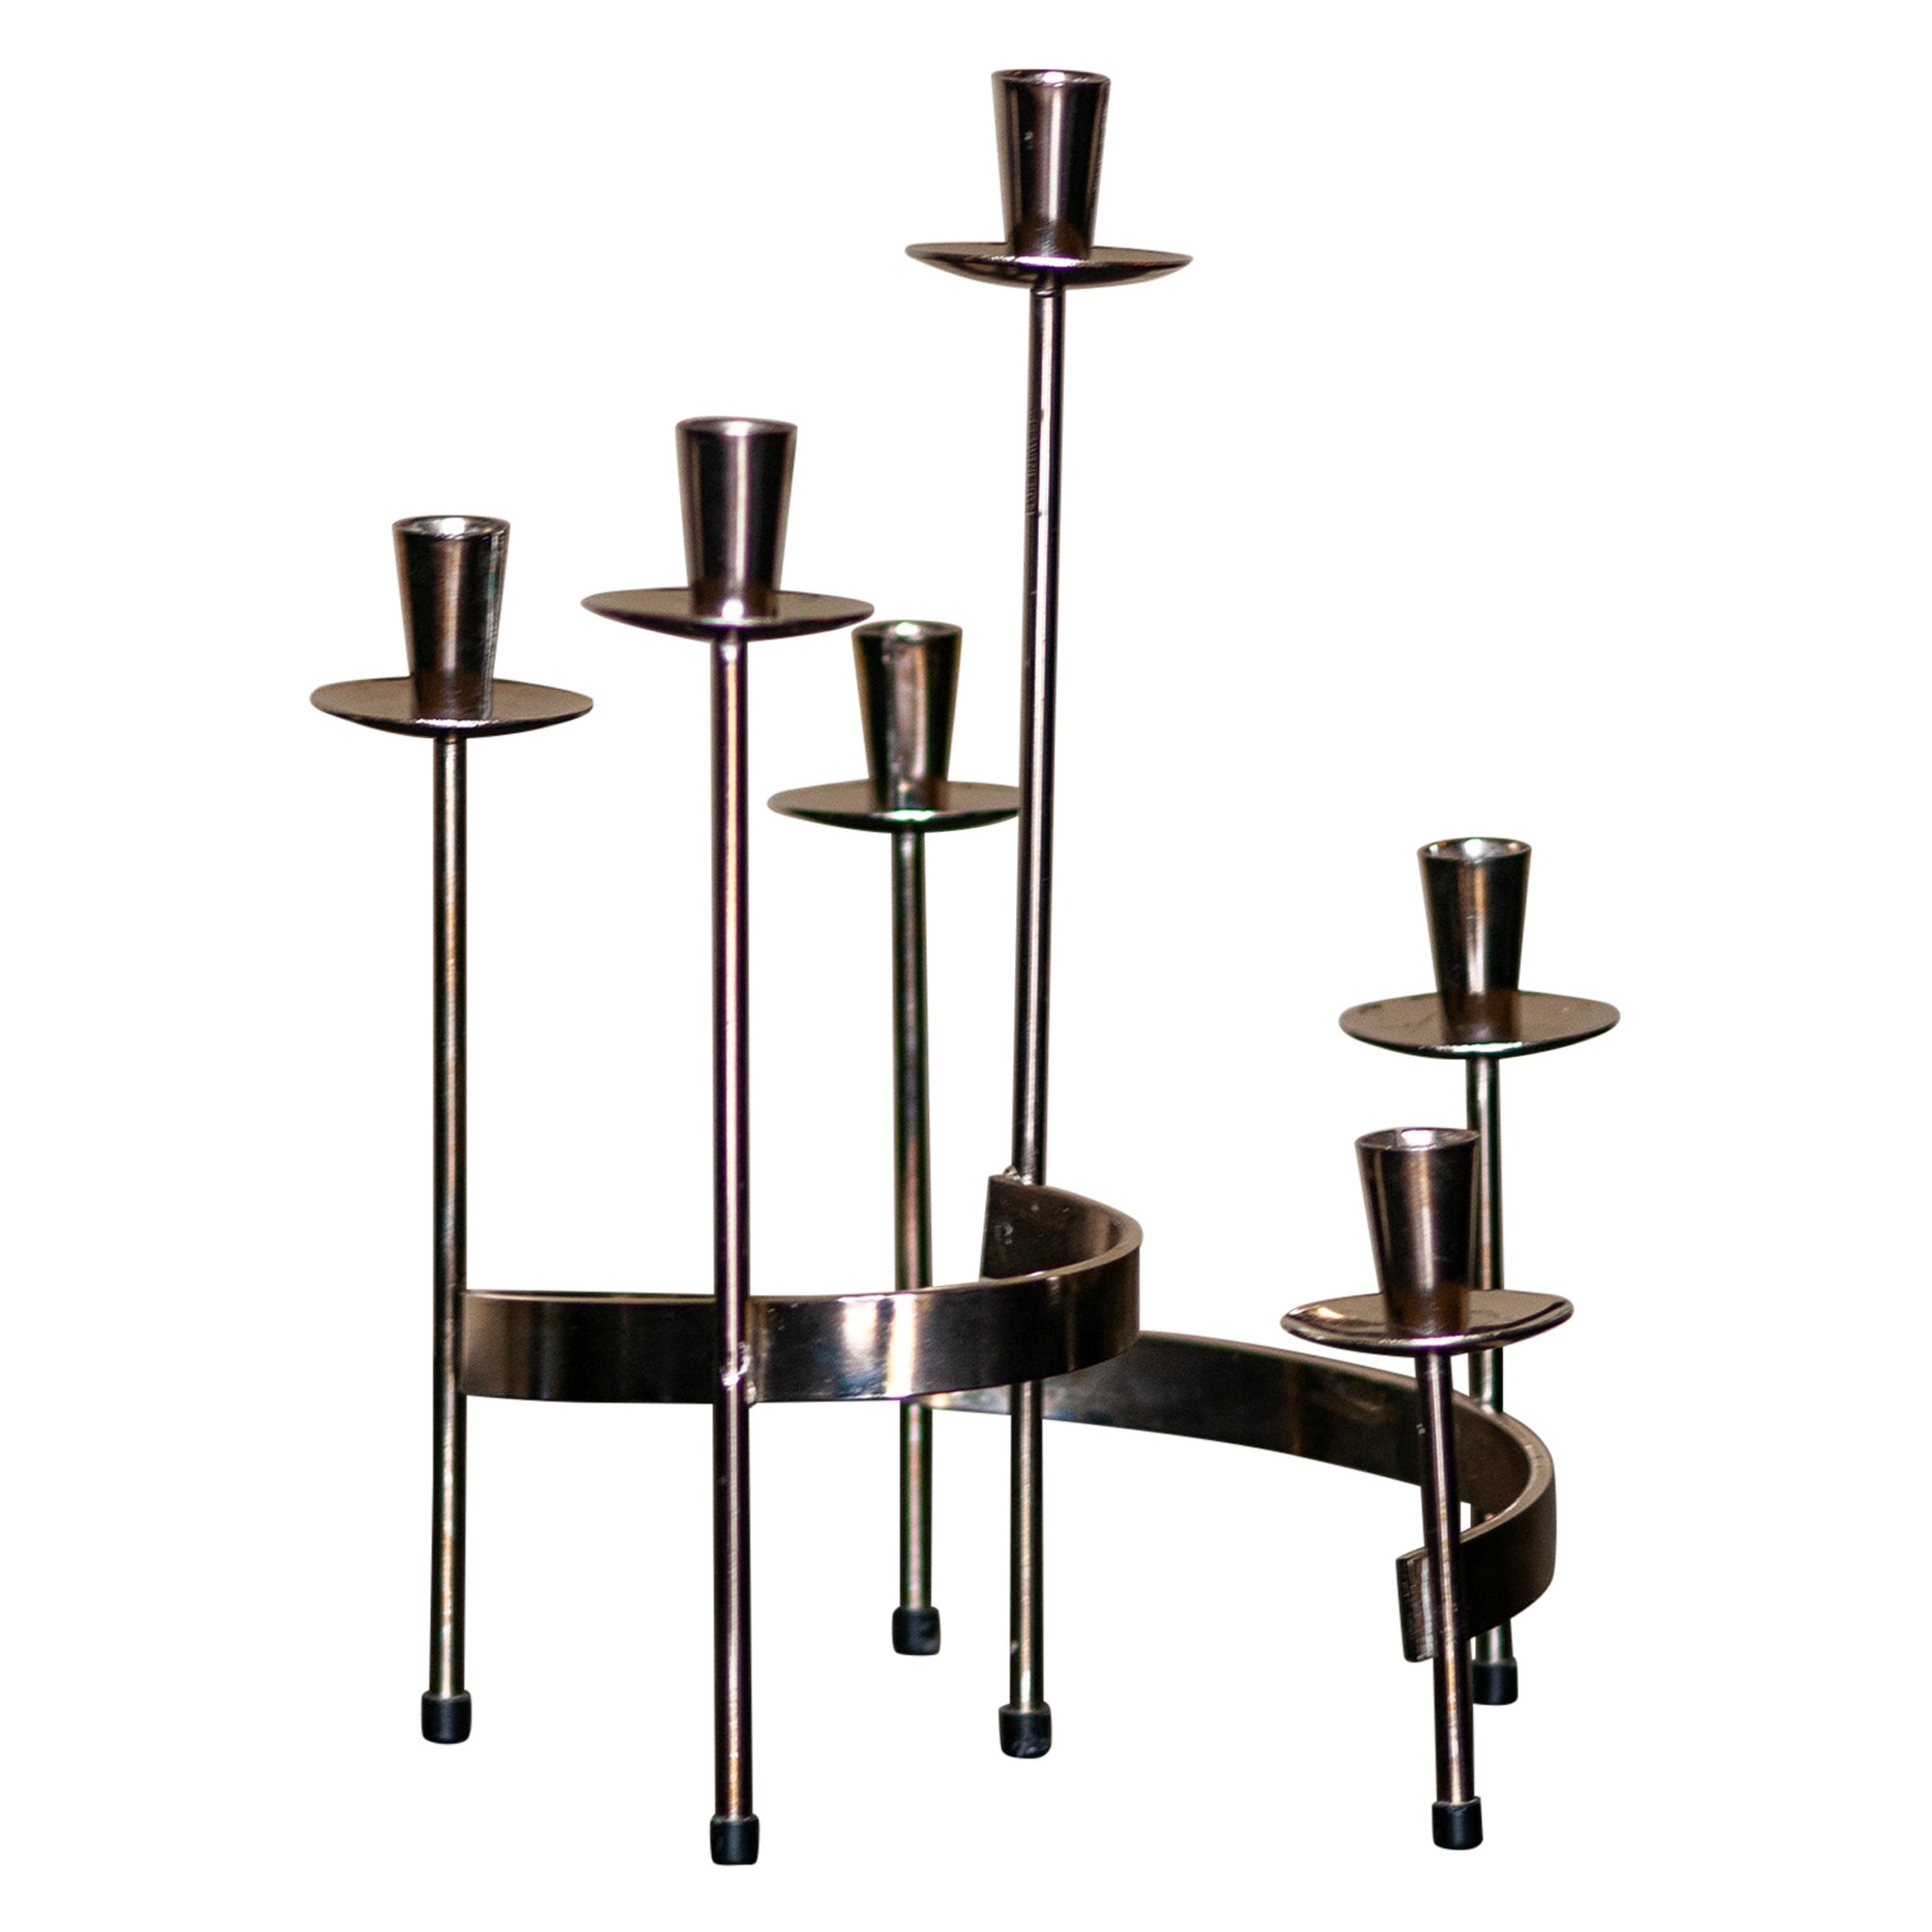 20th Century Candleholder designed by Gunnar Ander for Ystad-Metall